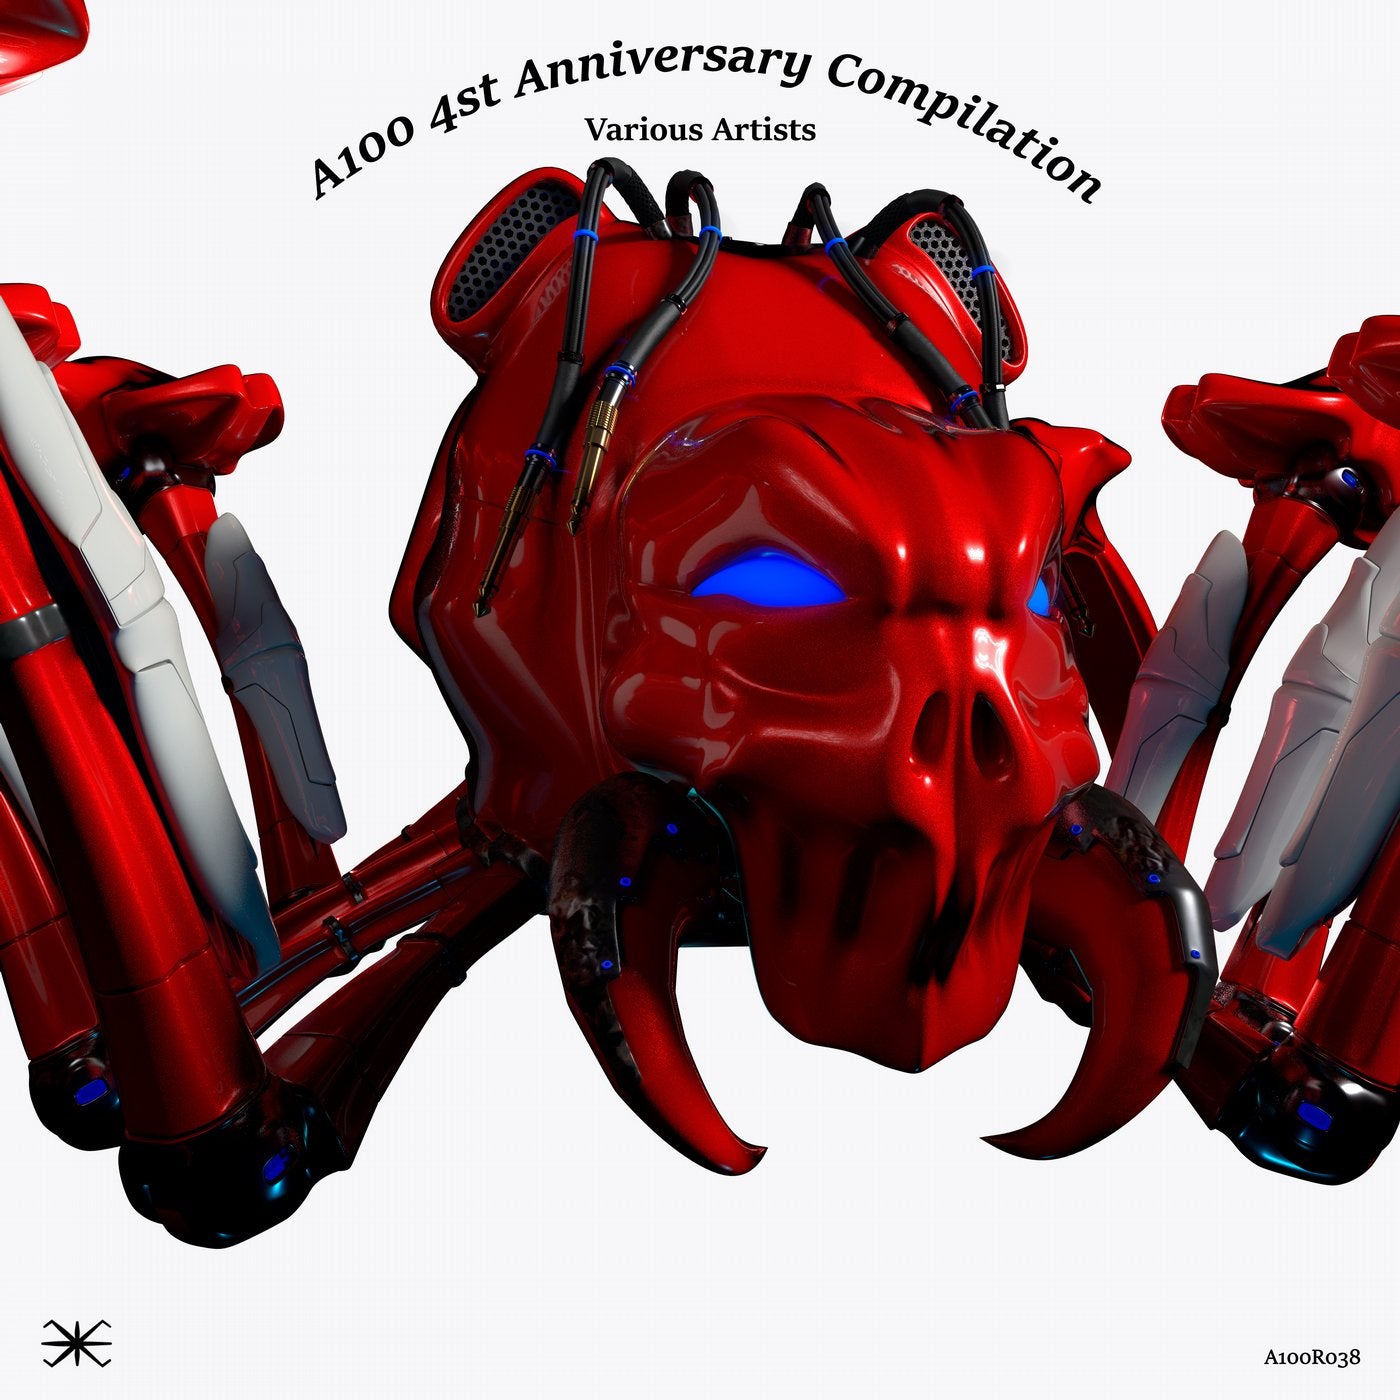 A100 4st Anniversary Compilation